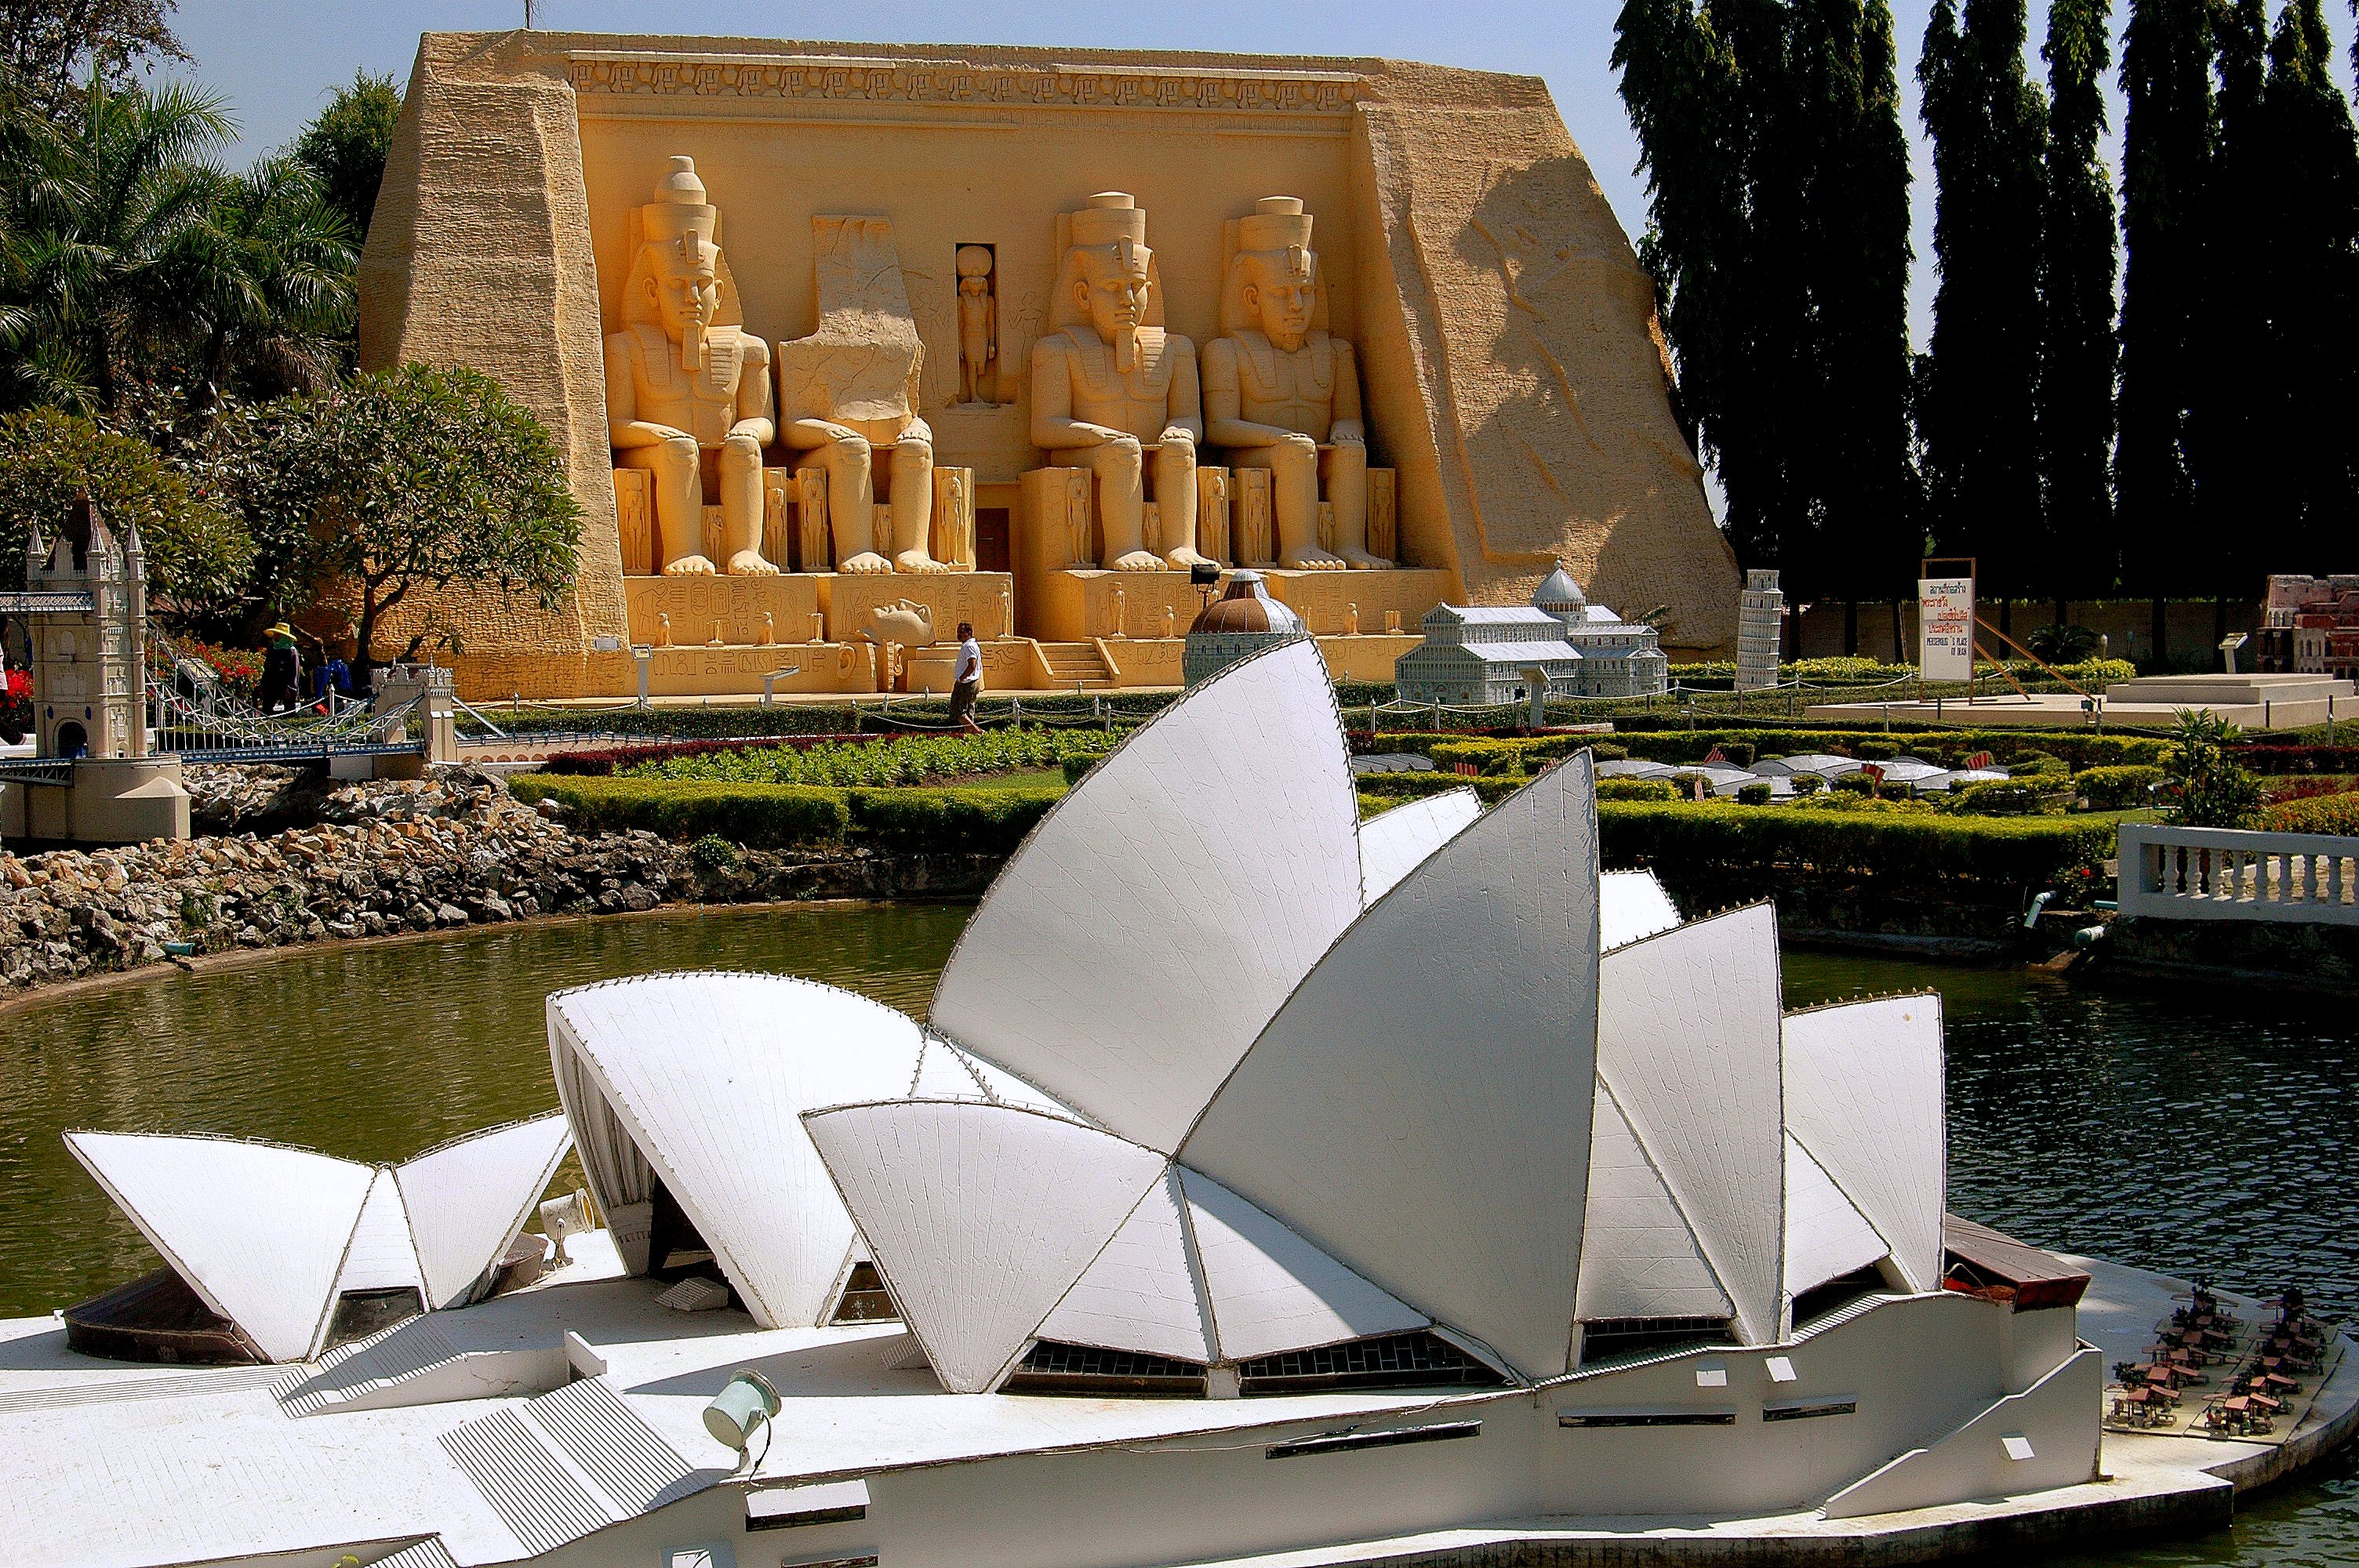 Pattaya, Thailand - December 30, 2005:  The Sydney, Austrailia Opera House and Egypt's Abu Simbel with four statues of Ramses II at Mini Siam outdoor theme park